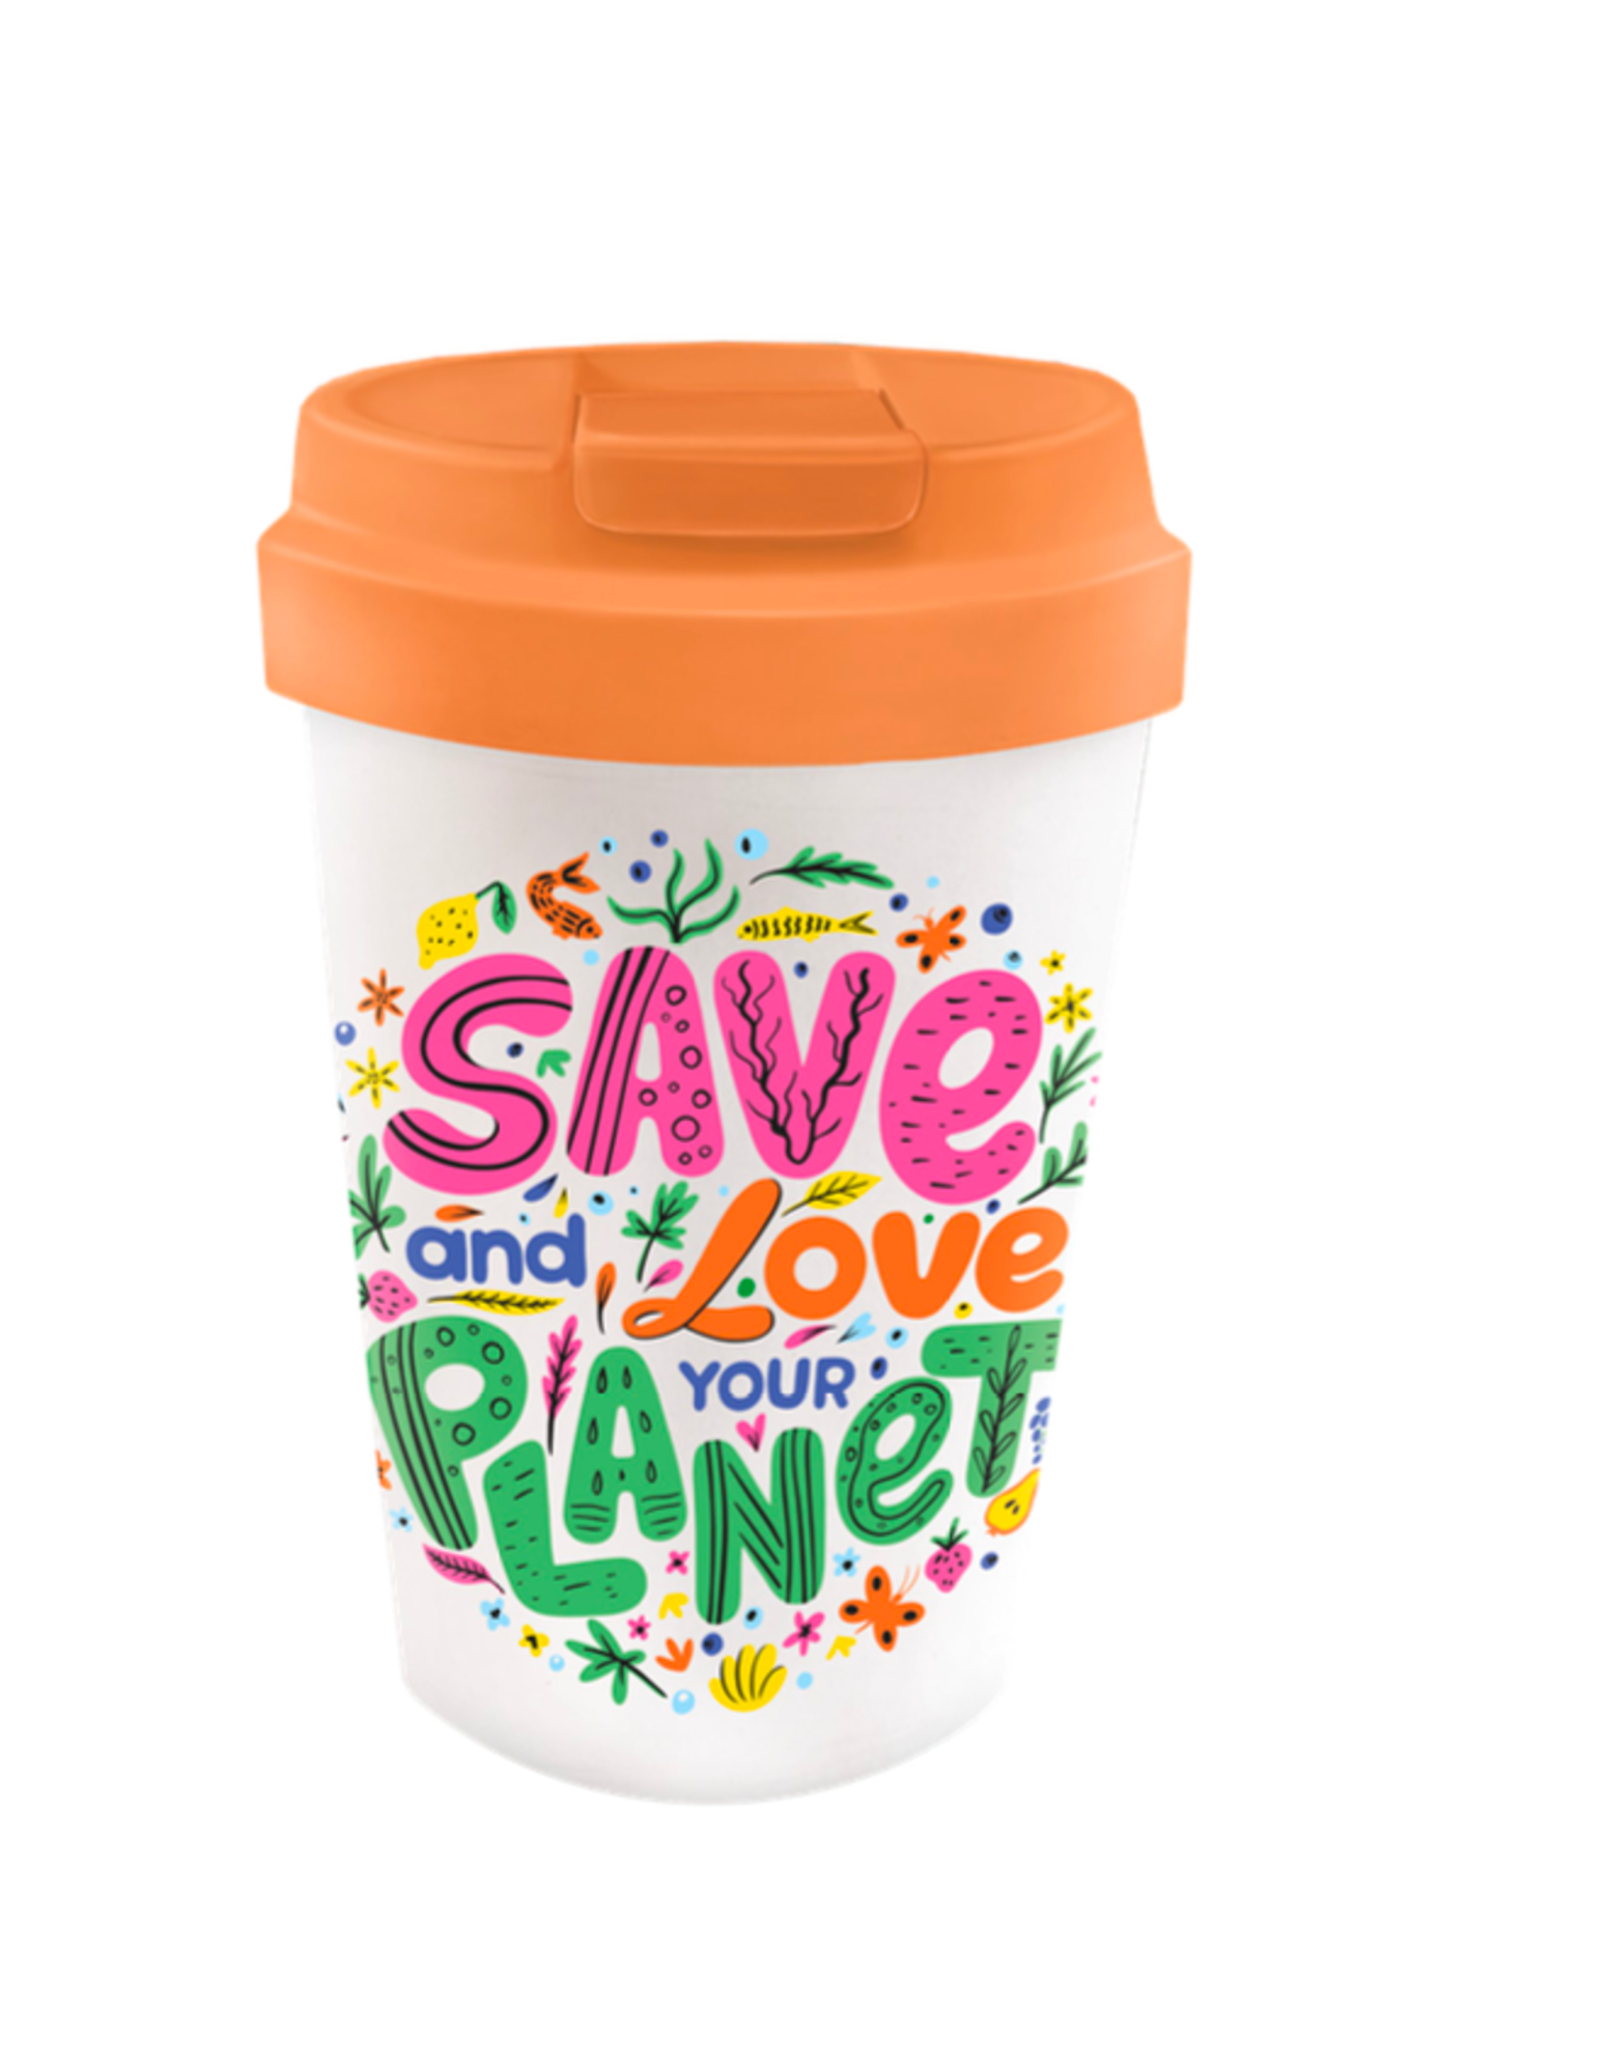 Jelly Jazz reisbeker - save and love your planet